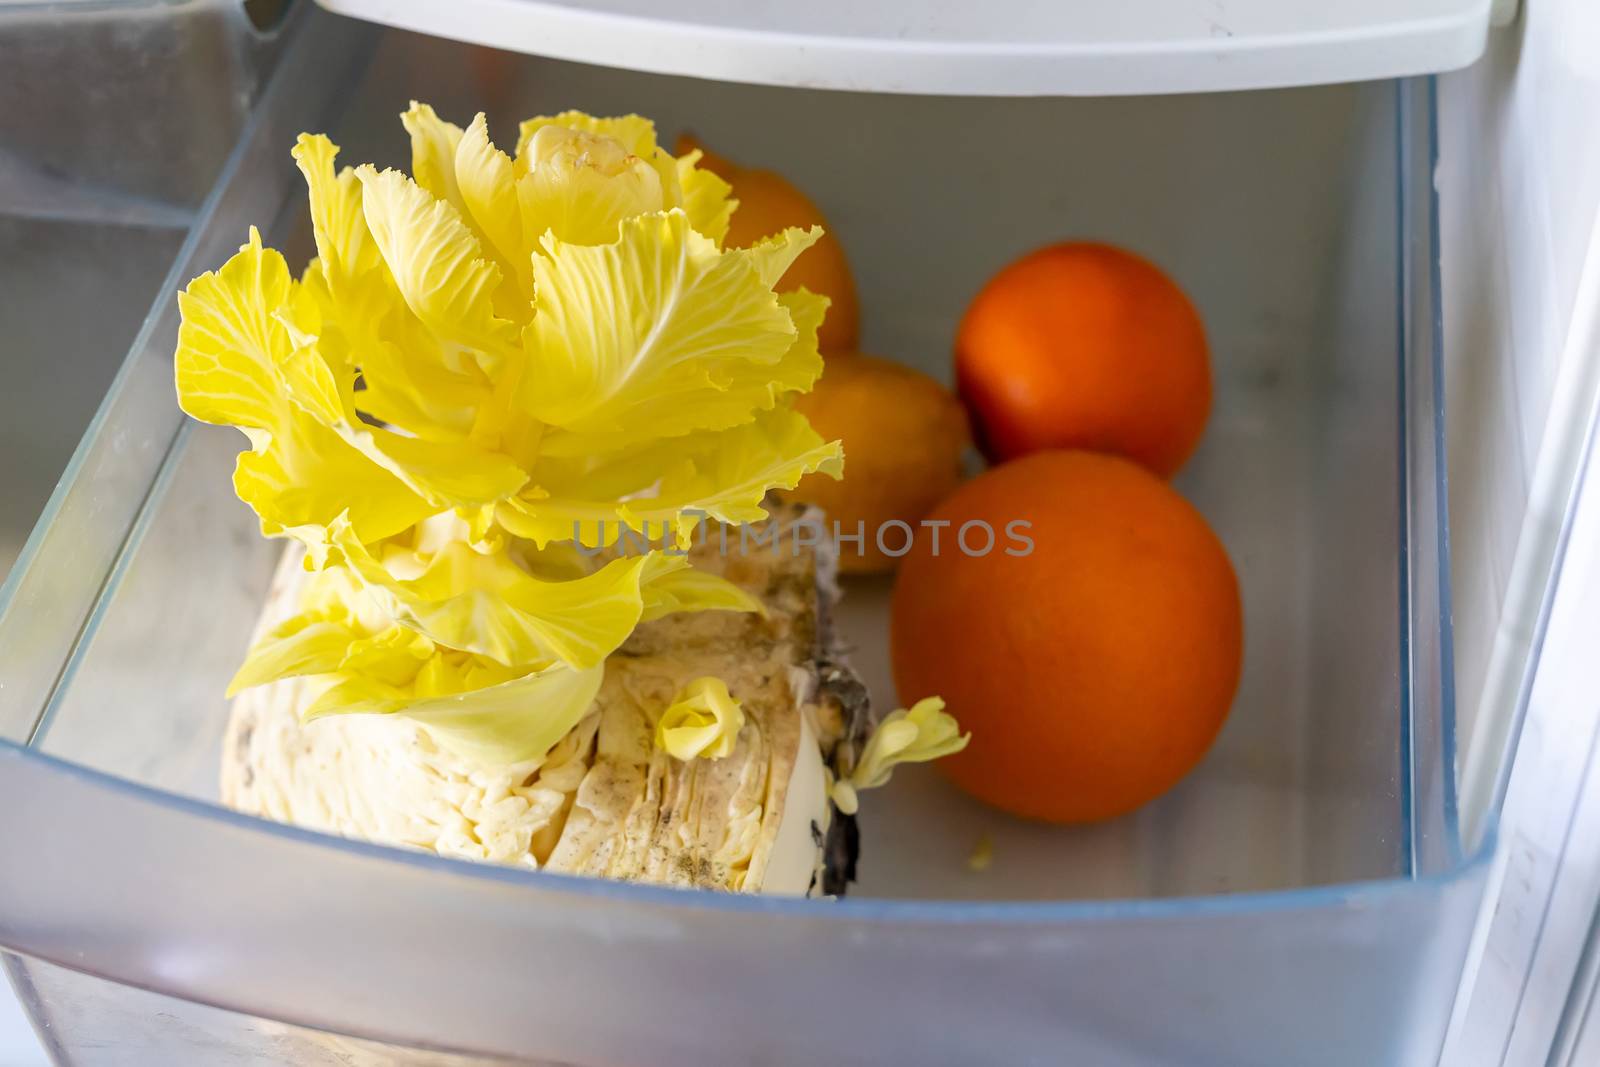 lemons, oranges and cabbage went bad in the fridge